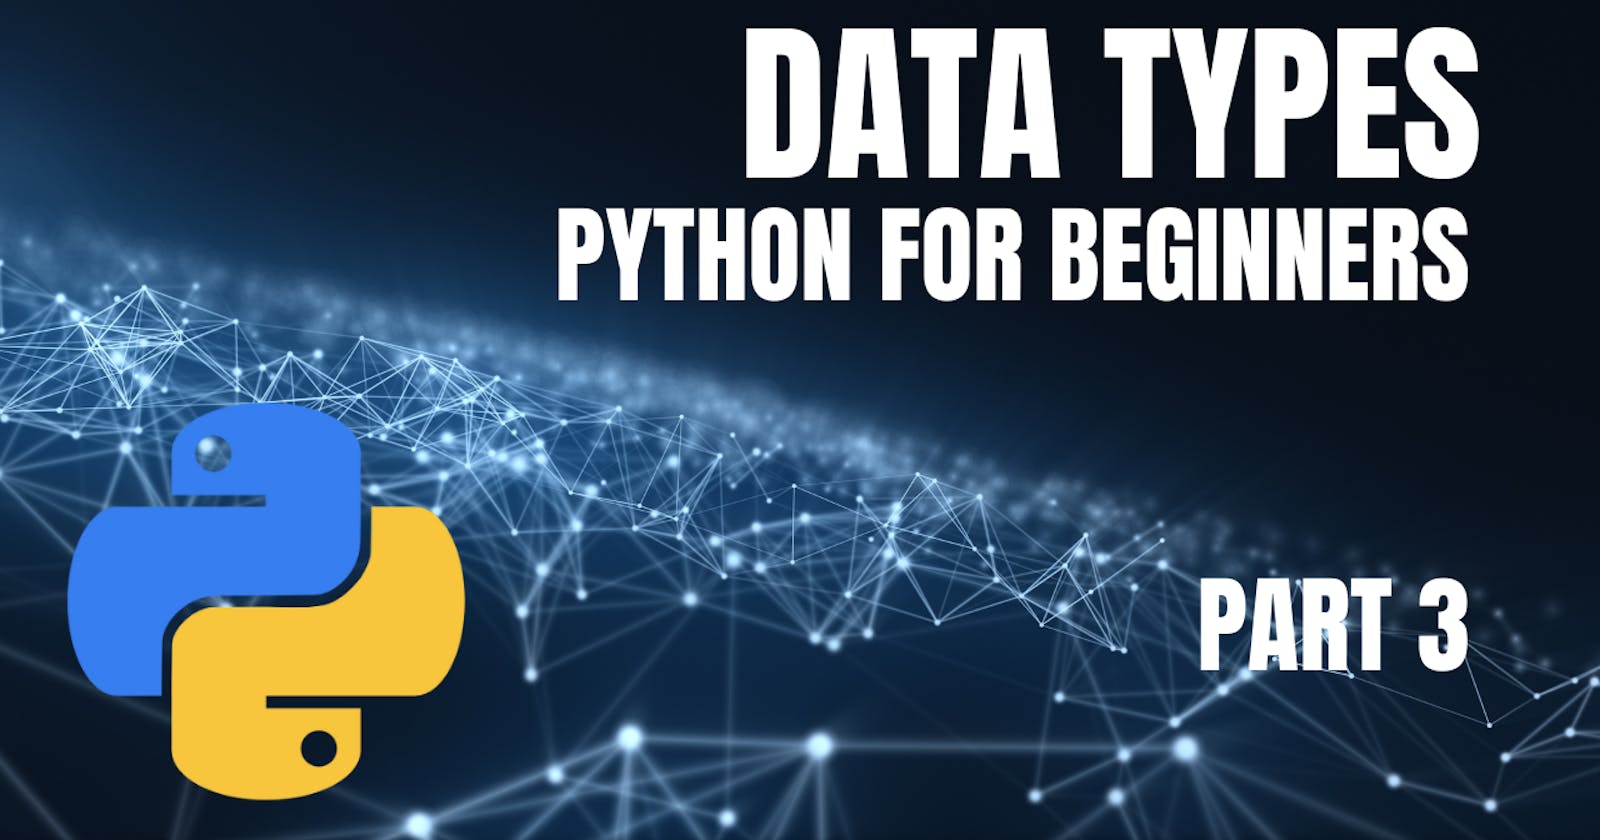 Python for Beginners: Part 3 - Exploring Data Types